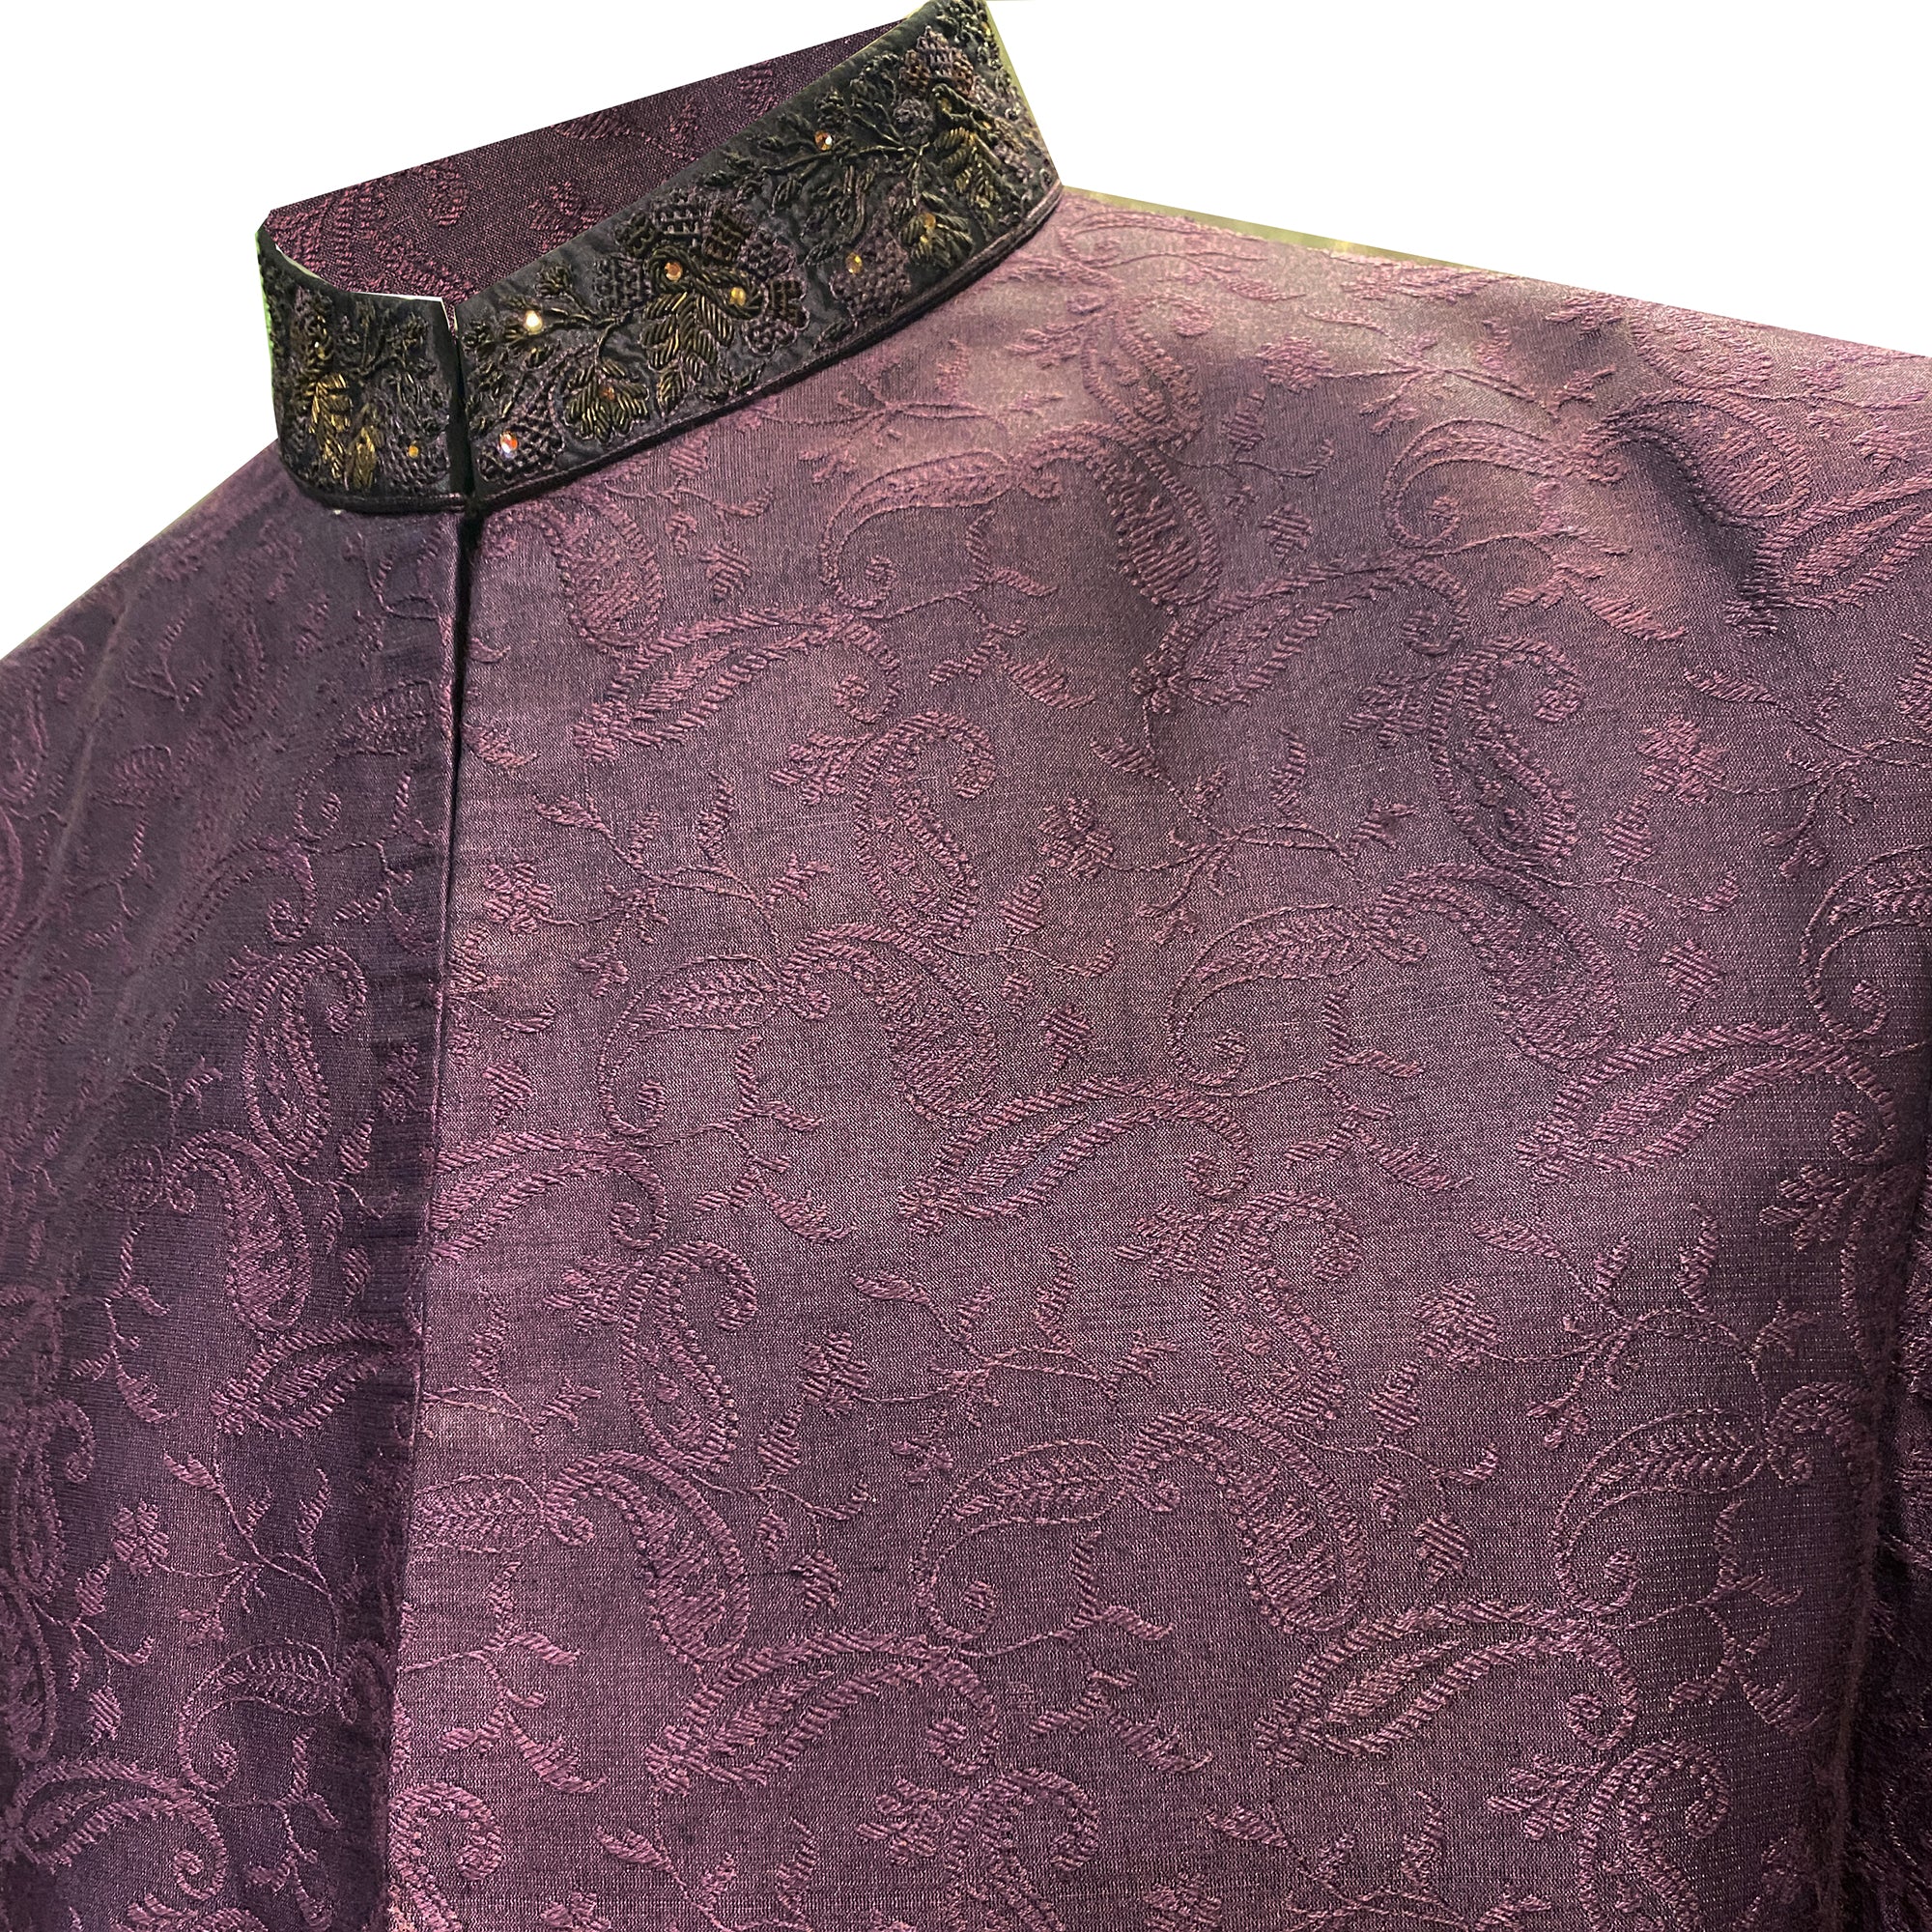 Purple Brocade Sherwani with Gold Embroidery - Vintage India NYC